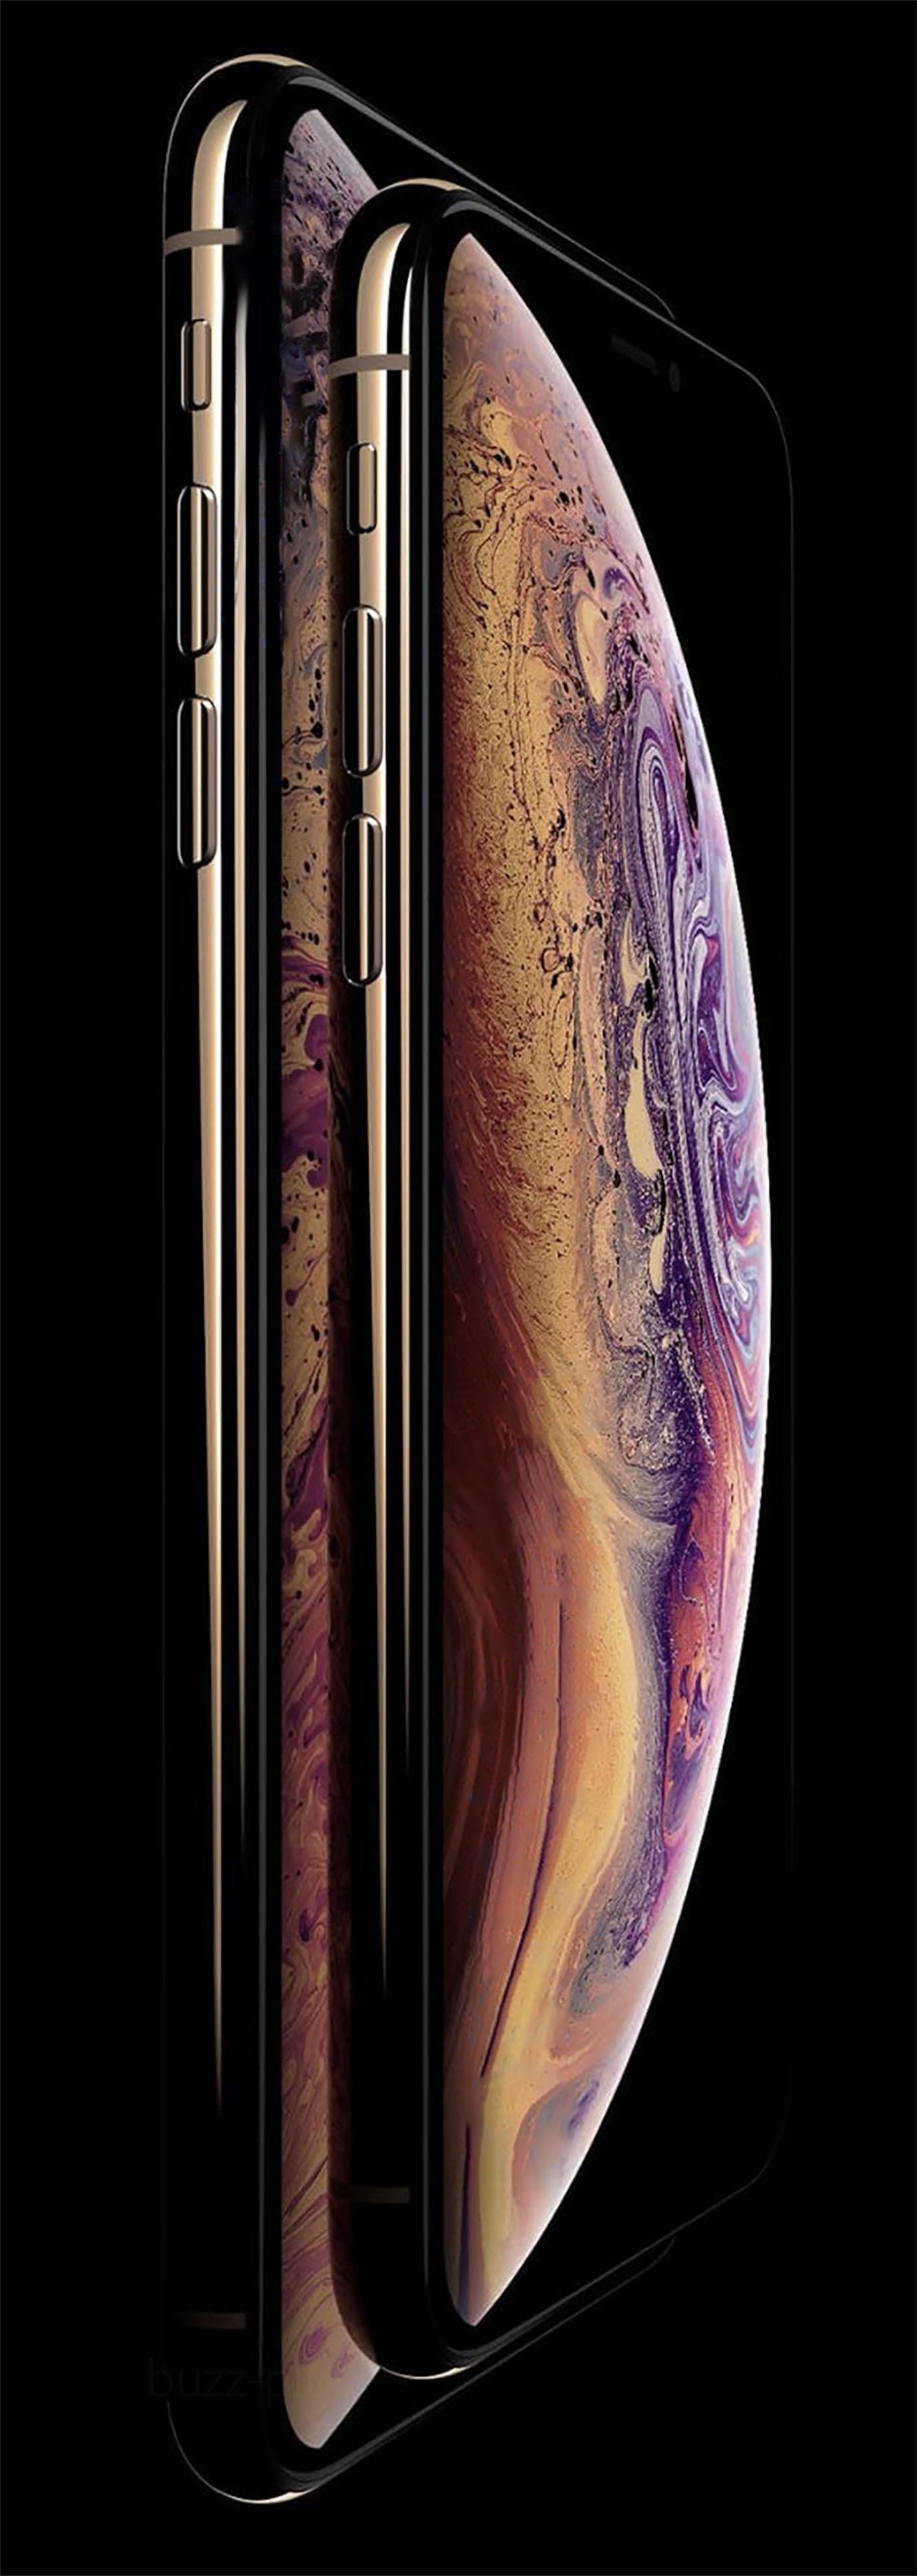 Iphone xs 12. Iphone 12 XS Max. Iphone 10 XS Max. Iphone XS Pro Max. 13 Pro iphone and XS Max.